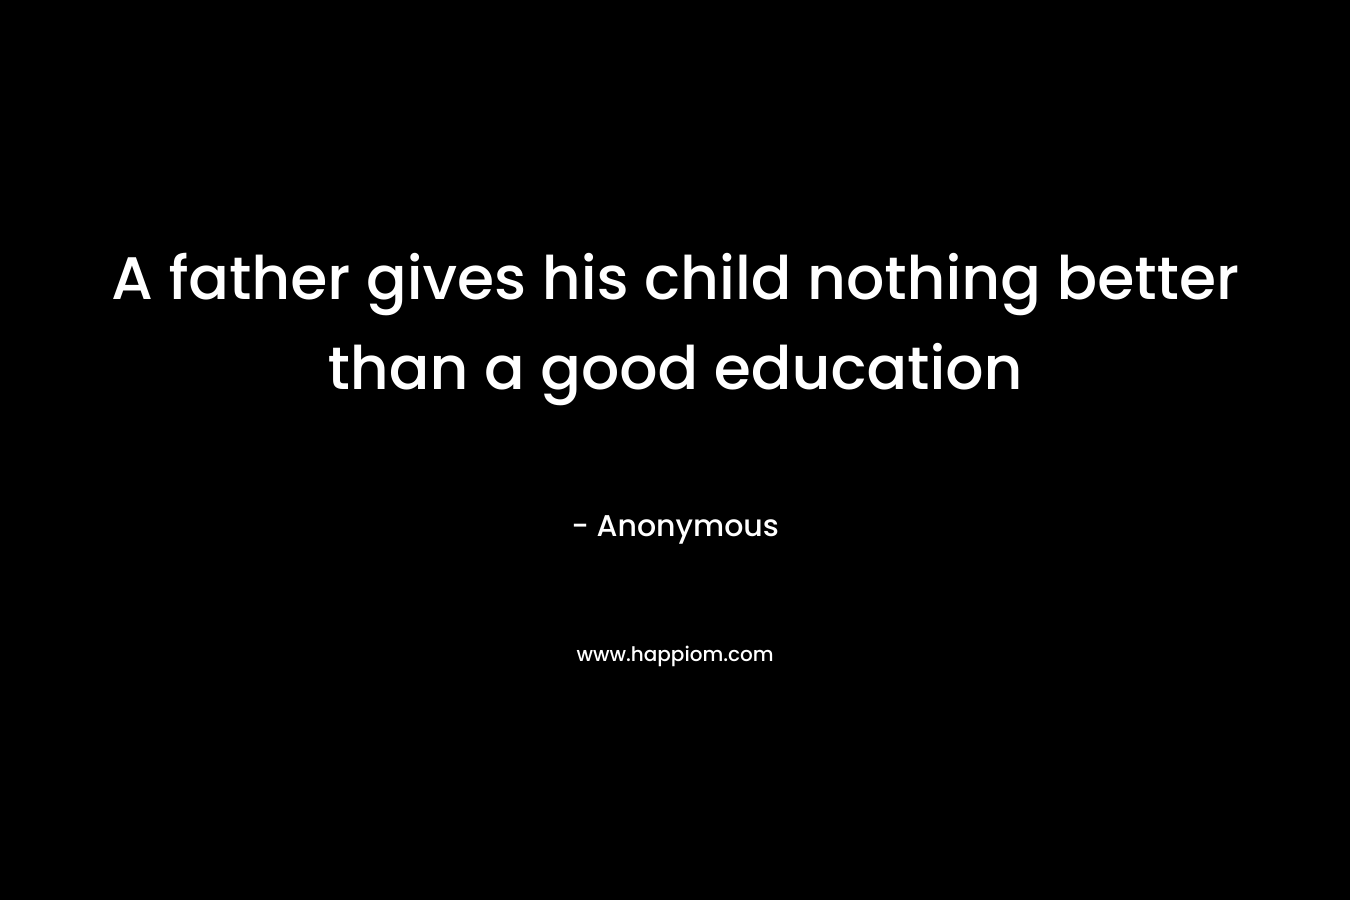 A father gives his child nothing better than a good education